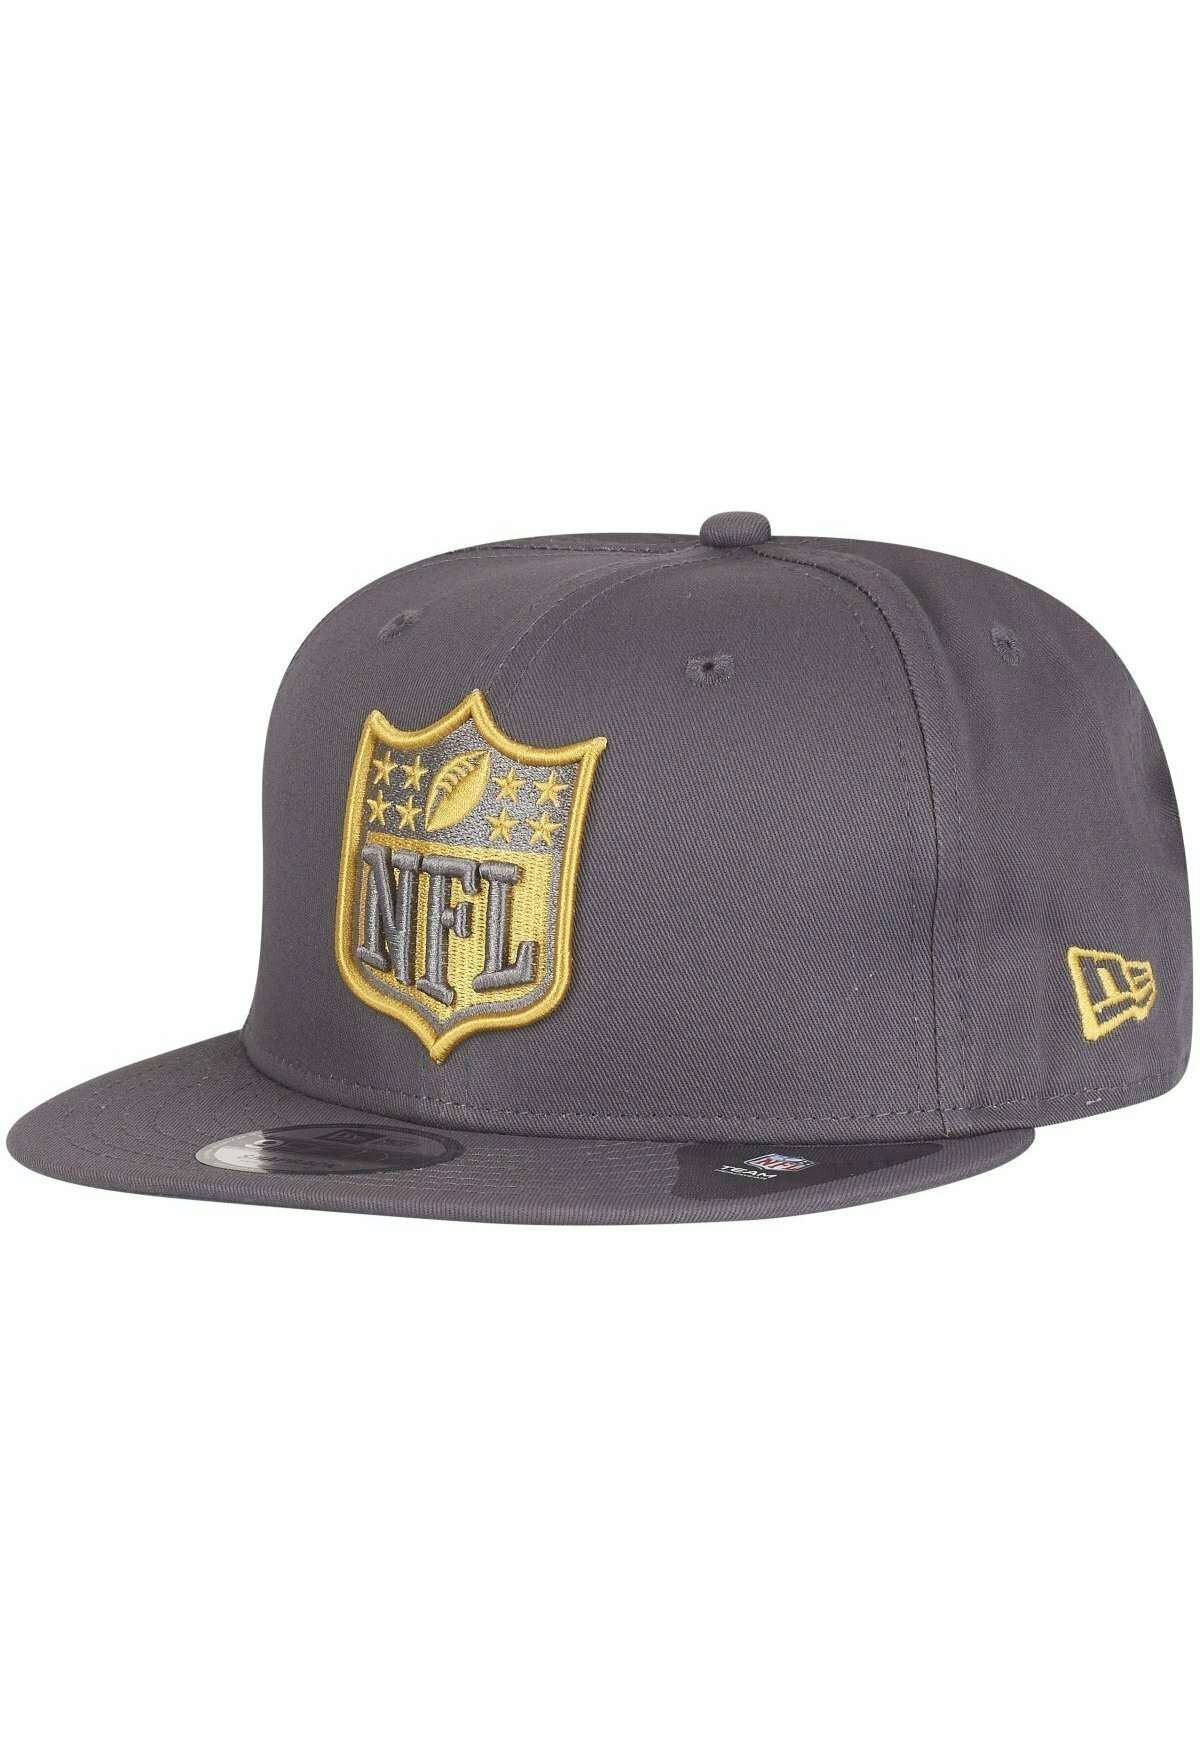 Кепка 9FIFTY NFL SHIELD GOLD